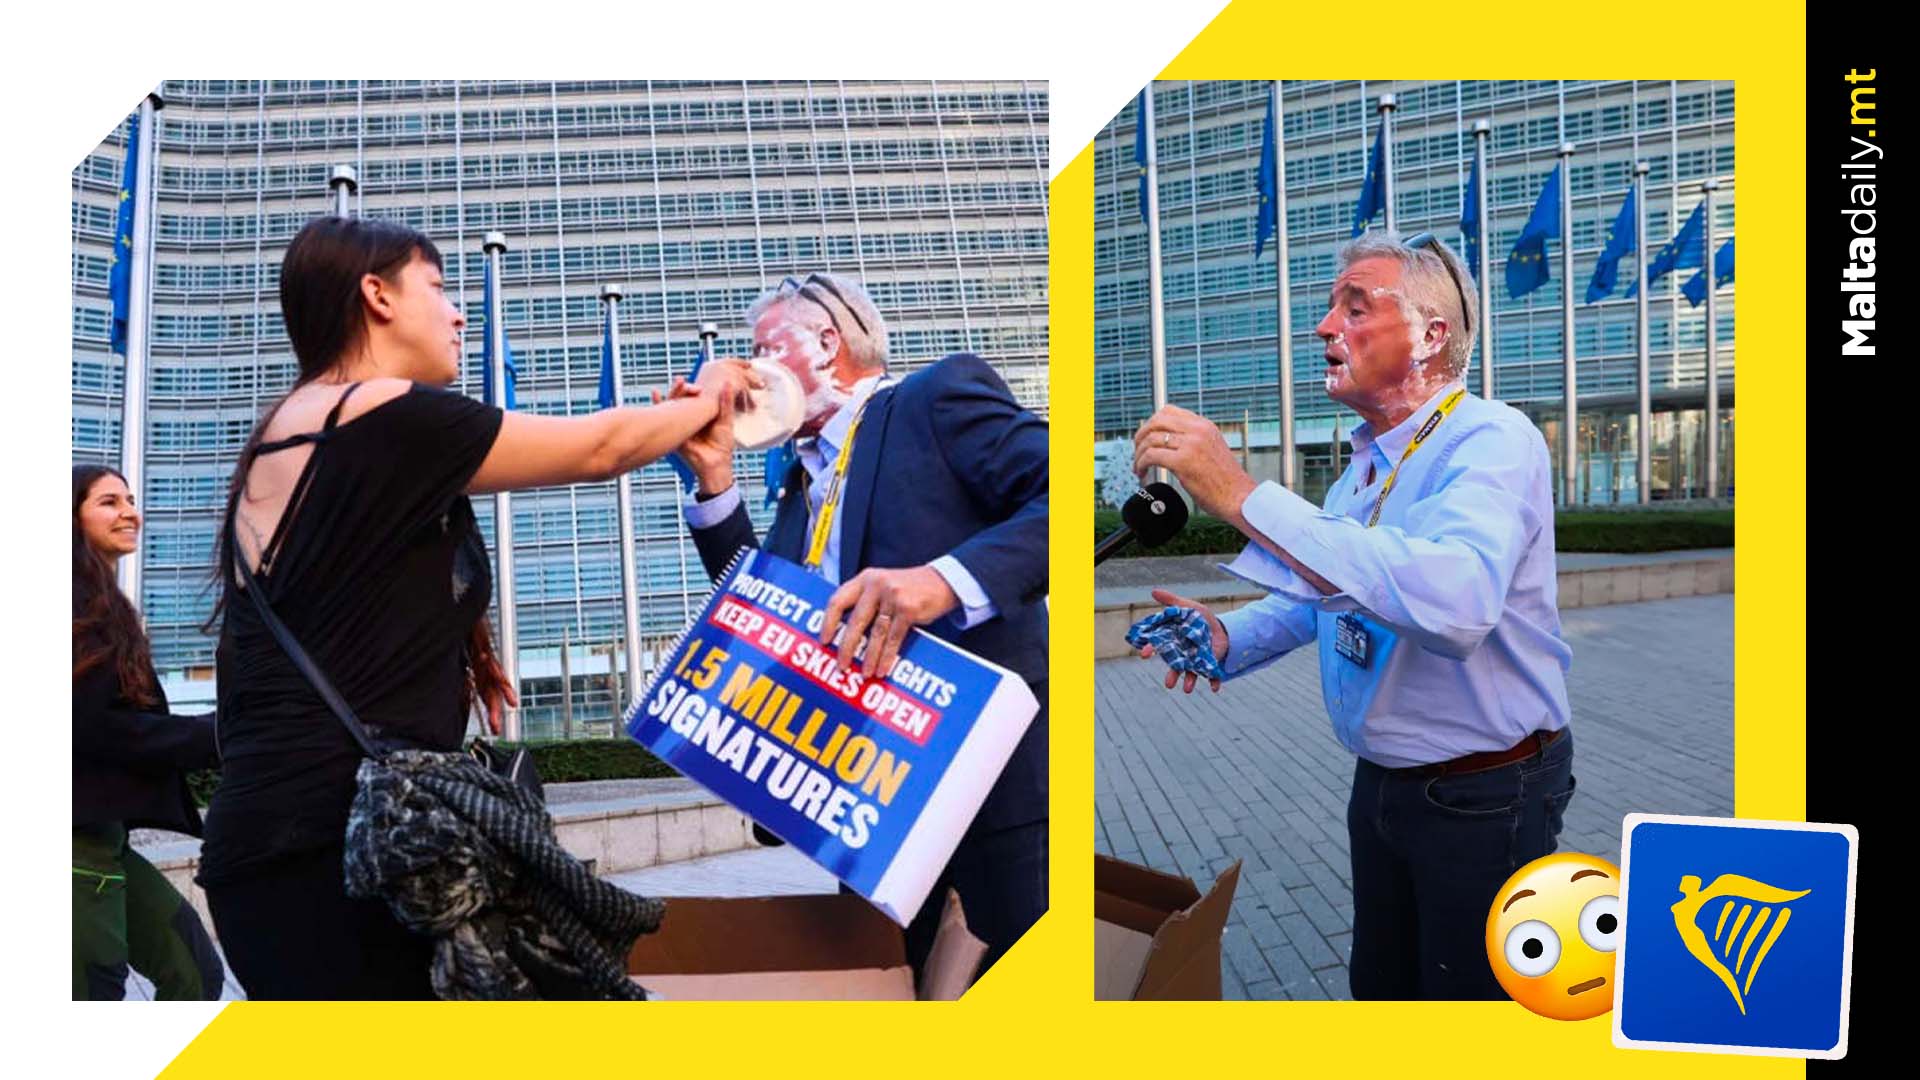 RyanAir CEO Has Cream Pie Smashed In His Face In Brussels